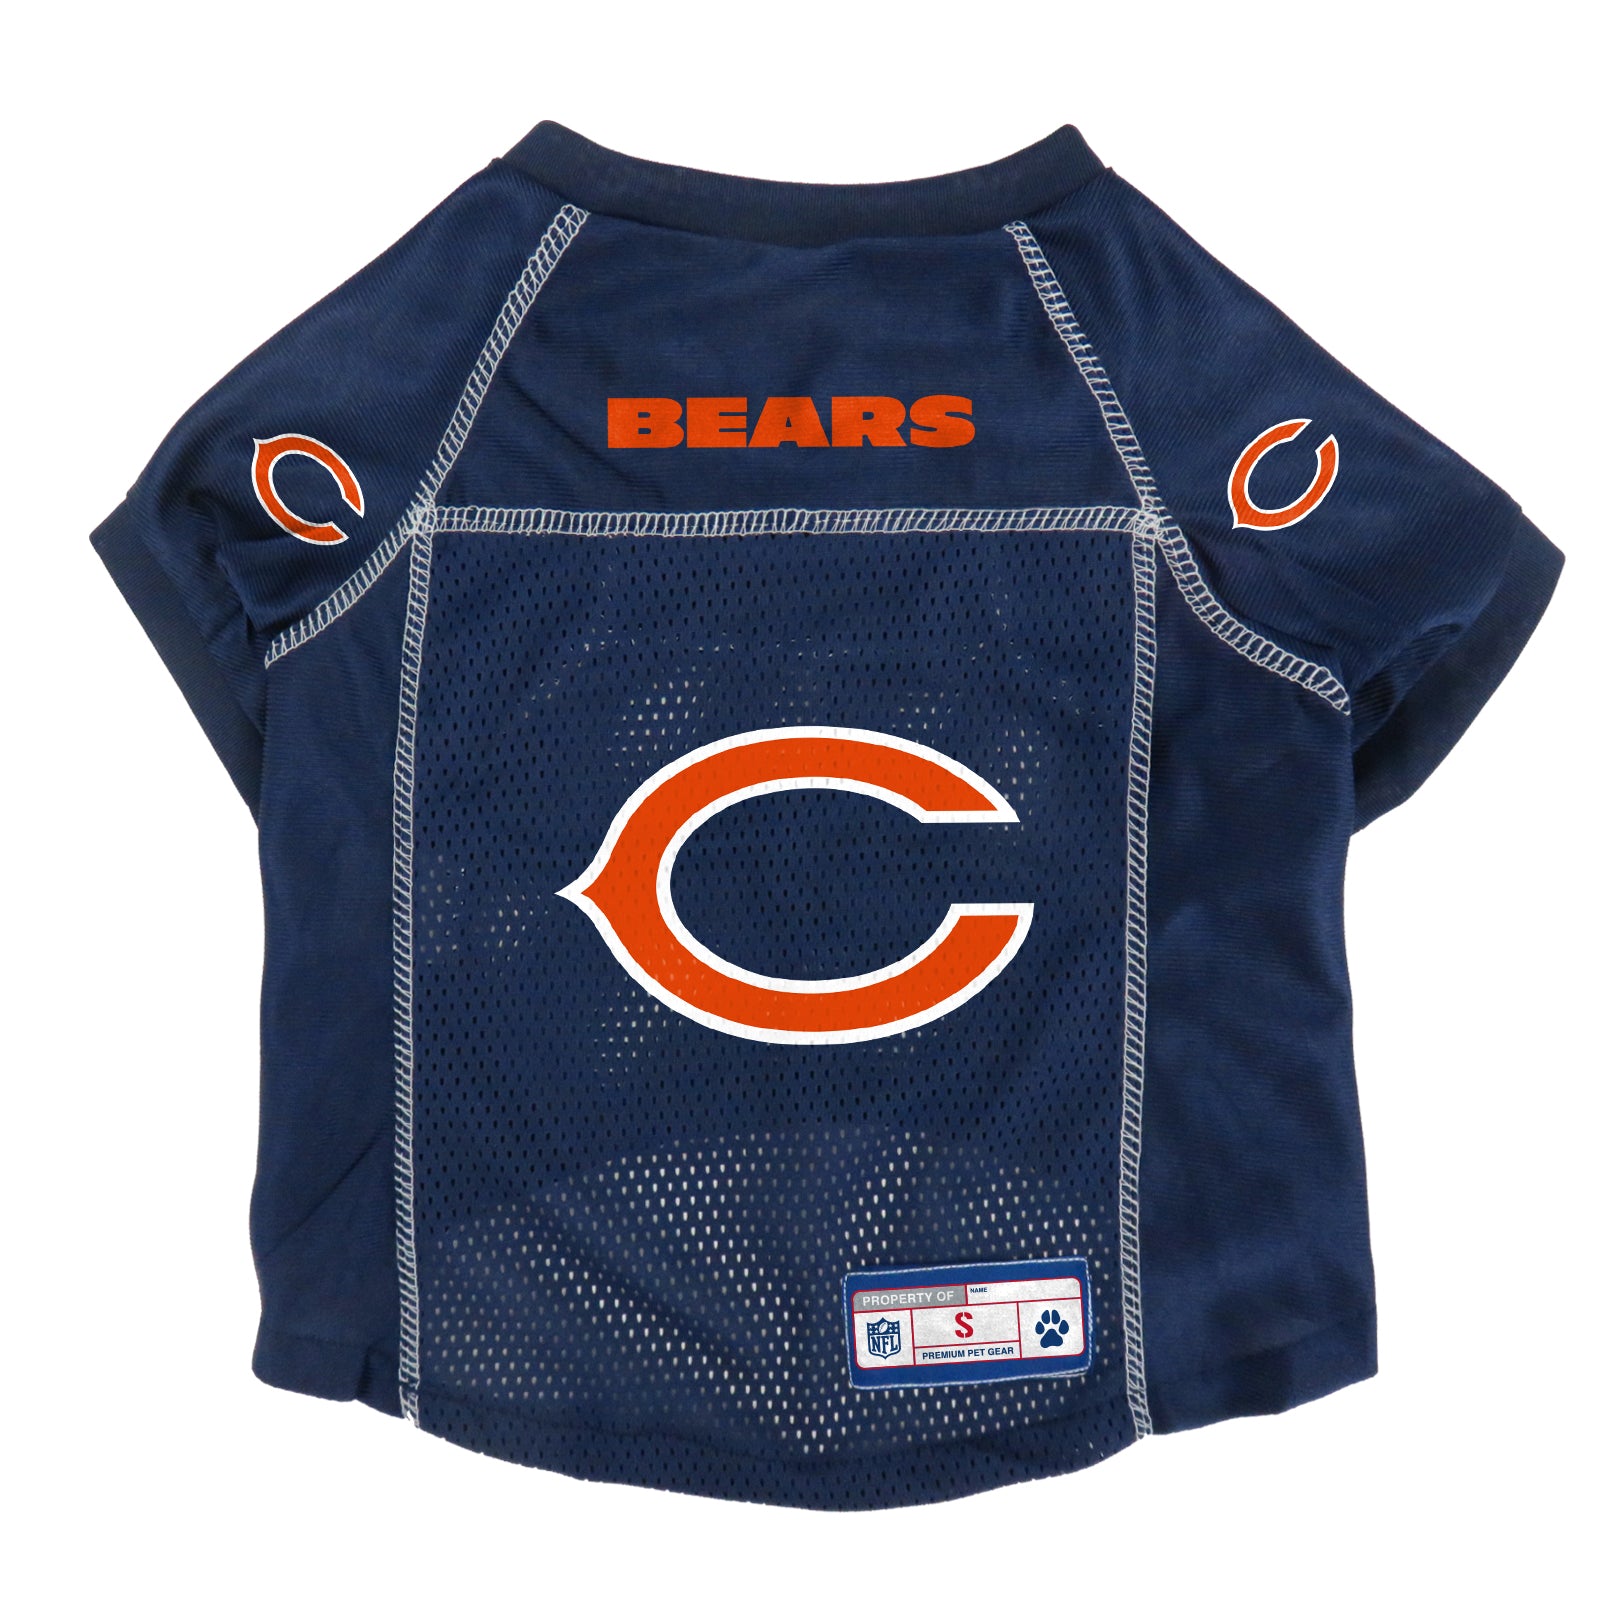 Pets First Pet Supplies San Francisco 49ers NFL CHICAGO BEARS MESH JERSEY  for DOGS CATS, San Francisco 49ers, Medium